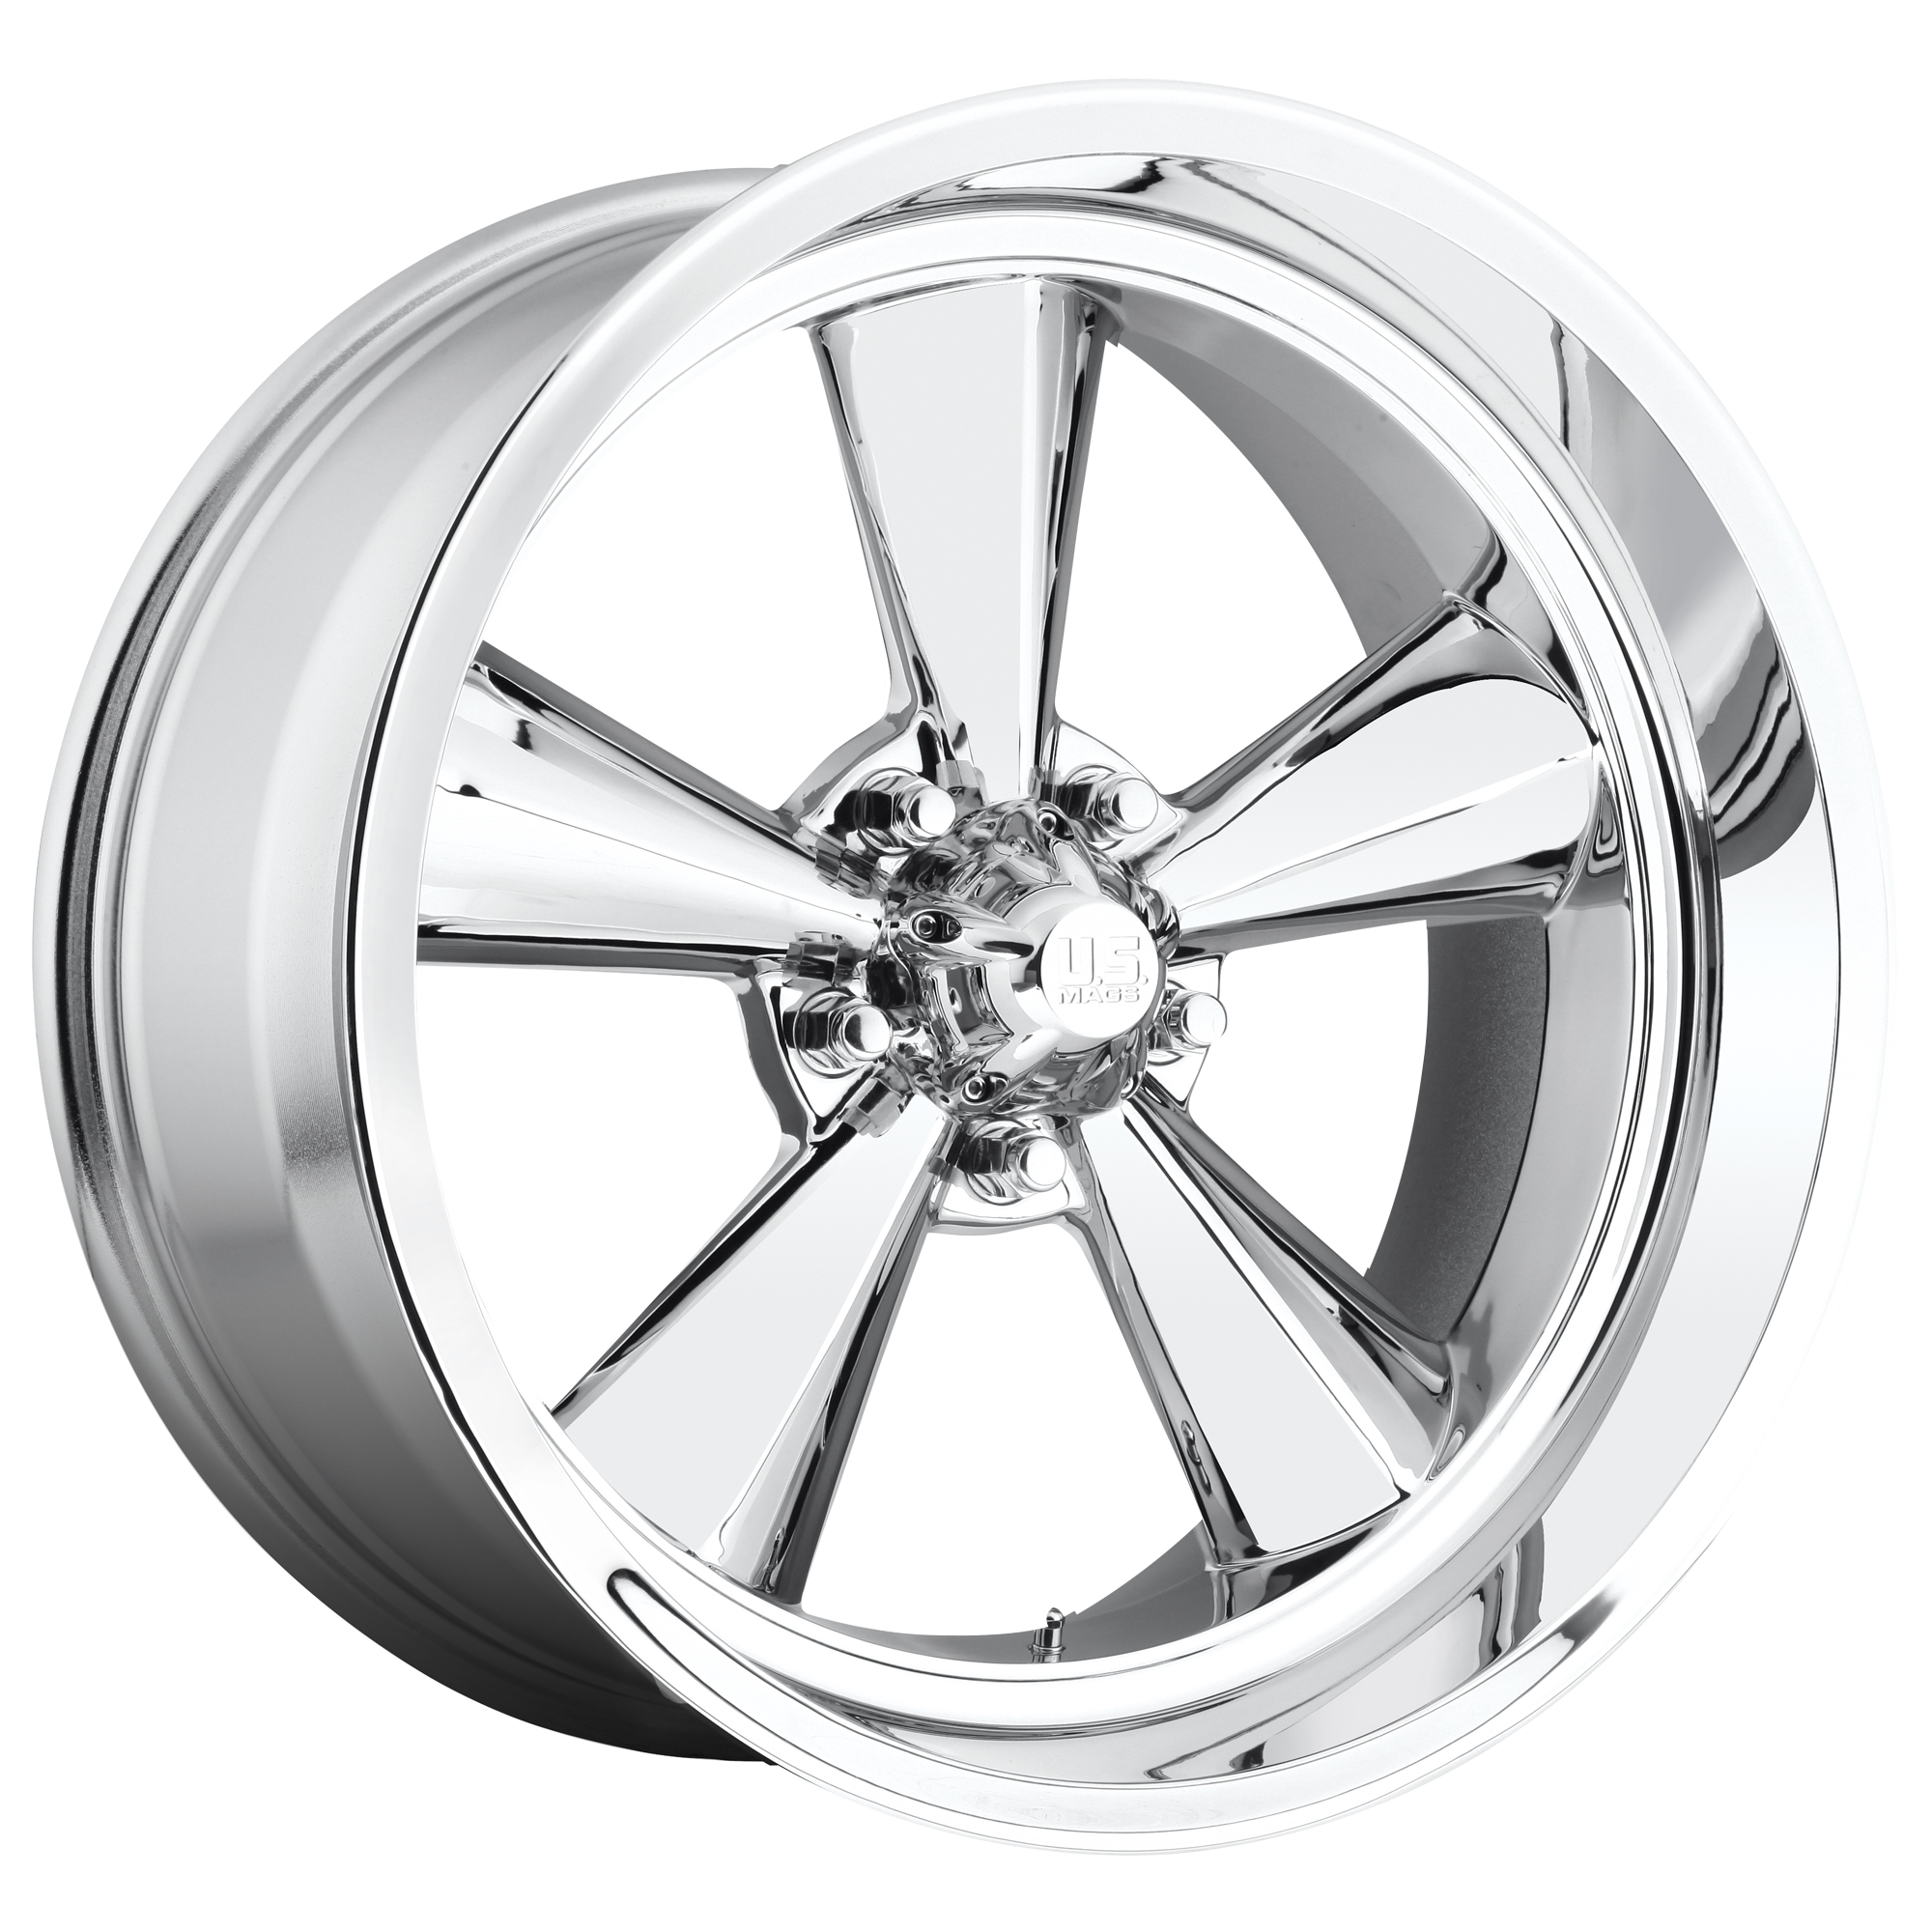 STANDARD 17x7 5x120.65 CHROME PLATED (1 mm) - Tires and Engine Performance